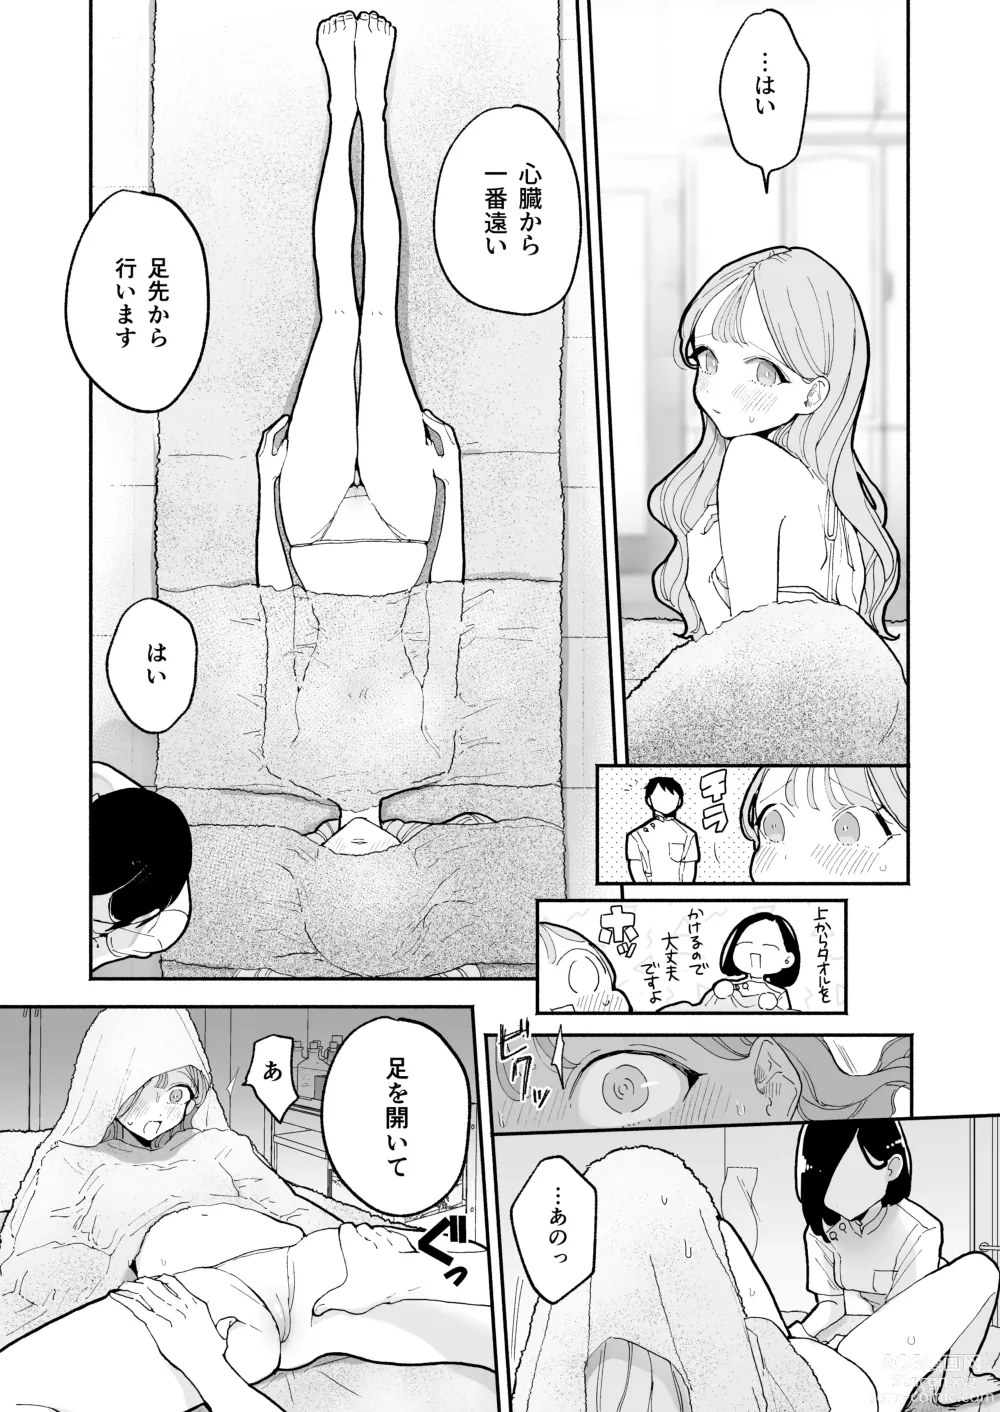 Page 9 of doujinshi Climax Reflex A story about a girl who becomes ◯◯ at an erotic massage shop in front of the station